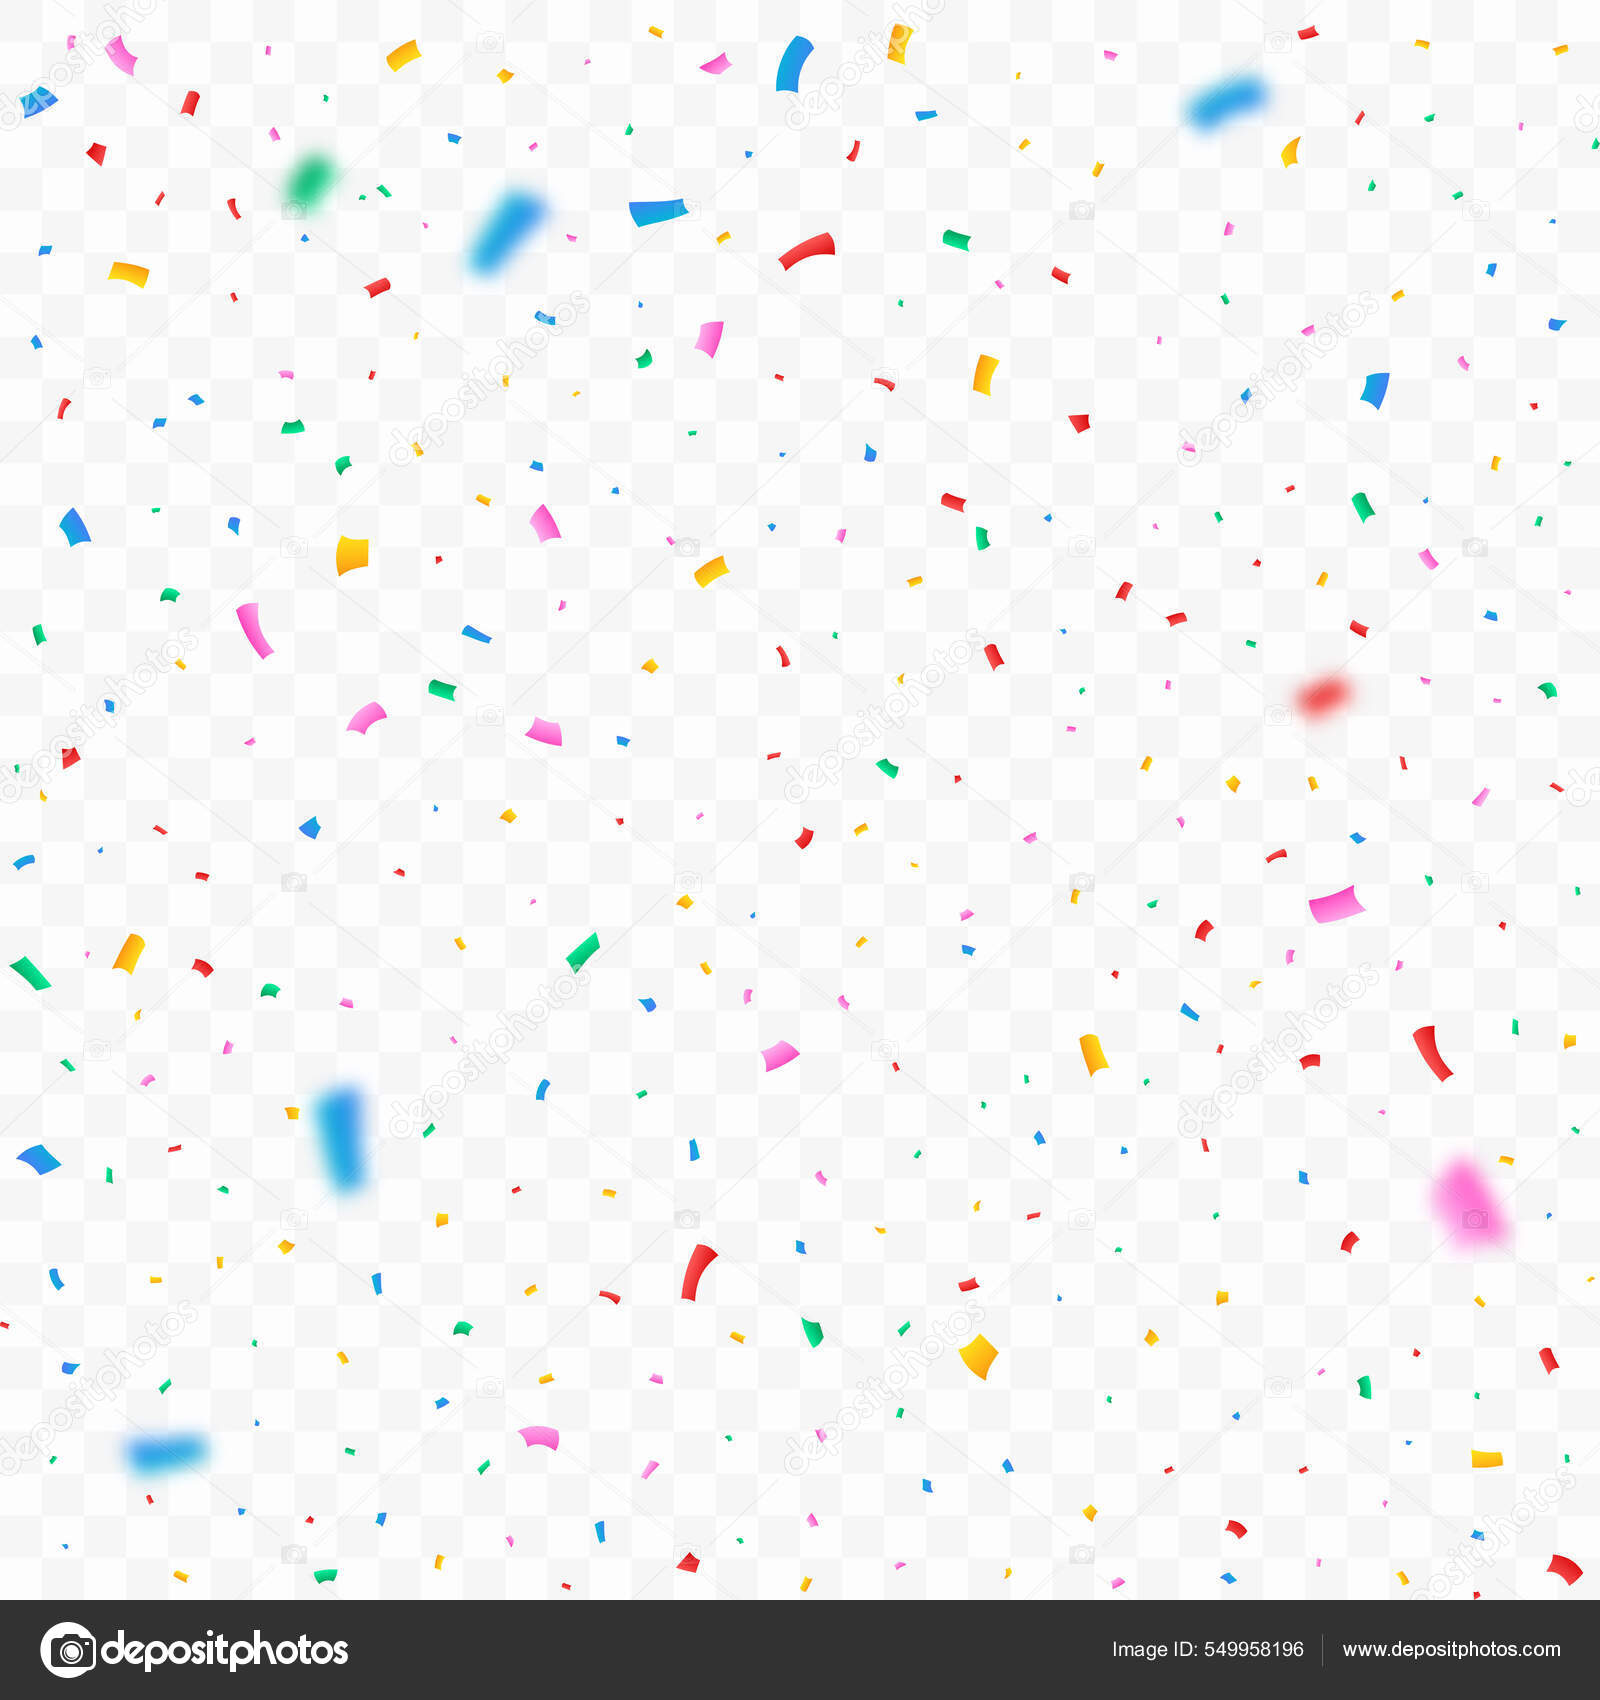 Confetti illustration for the festival background. Colorful party